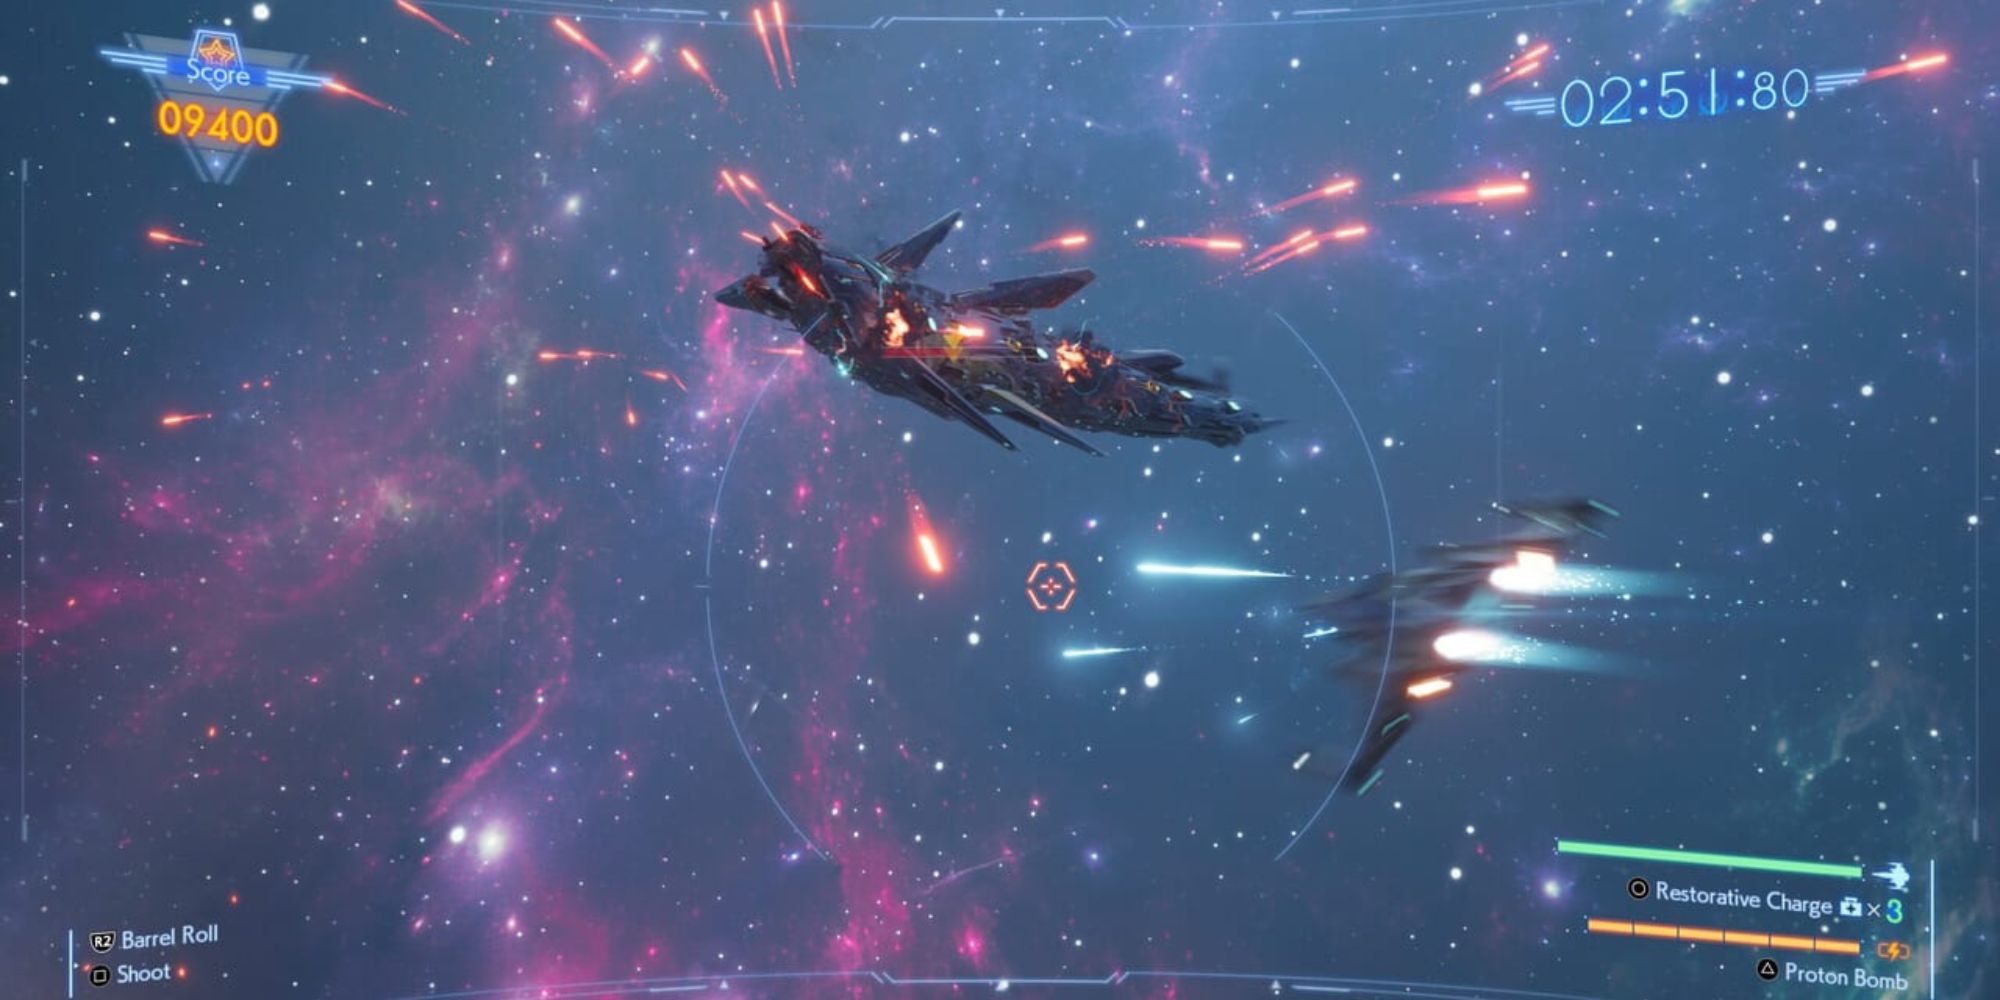 Screenshot from Final Fantasy 7 Rebirth of the Galactic Saviors game set in space with crafts firing at each other.